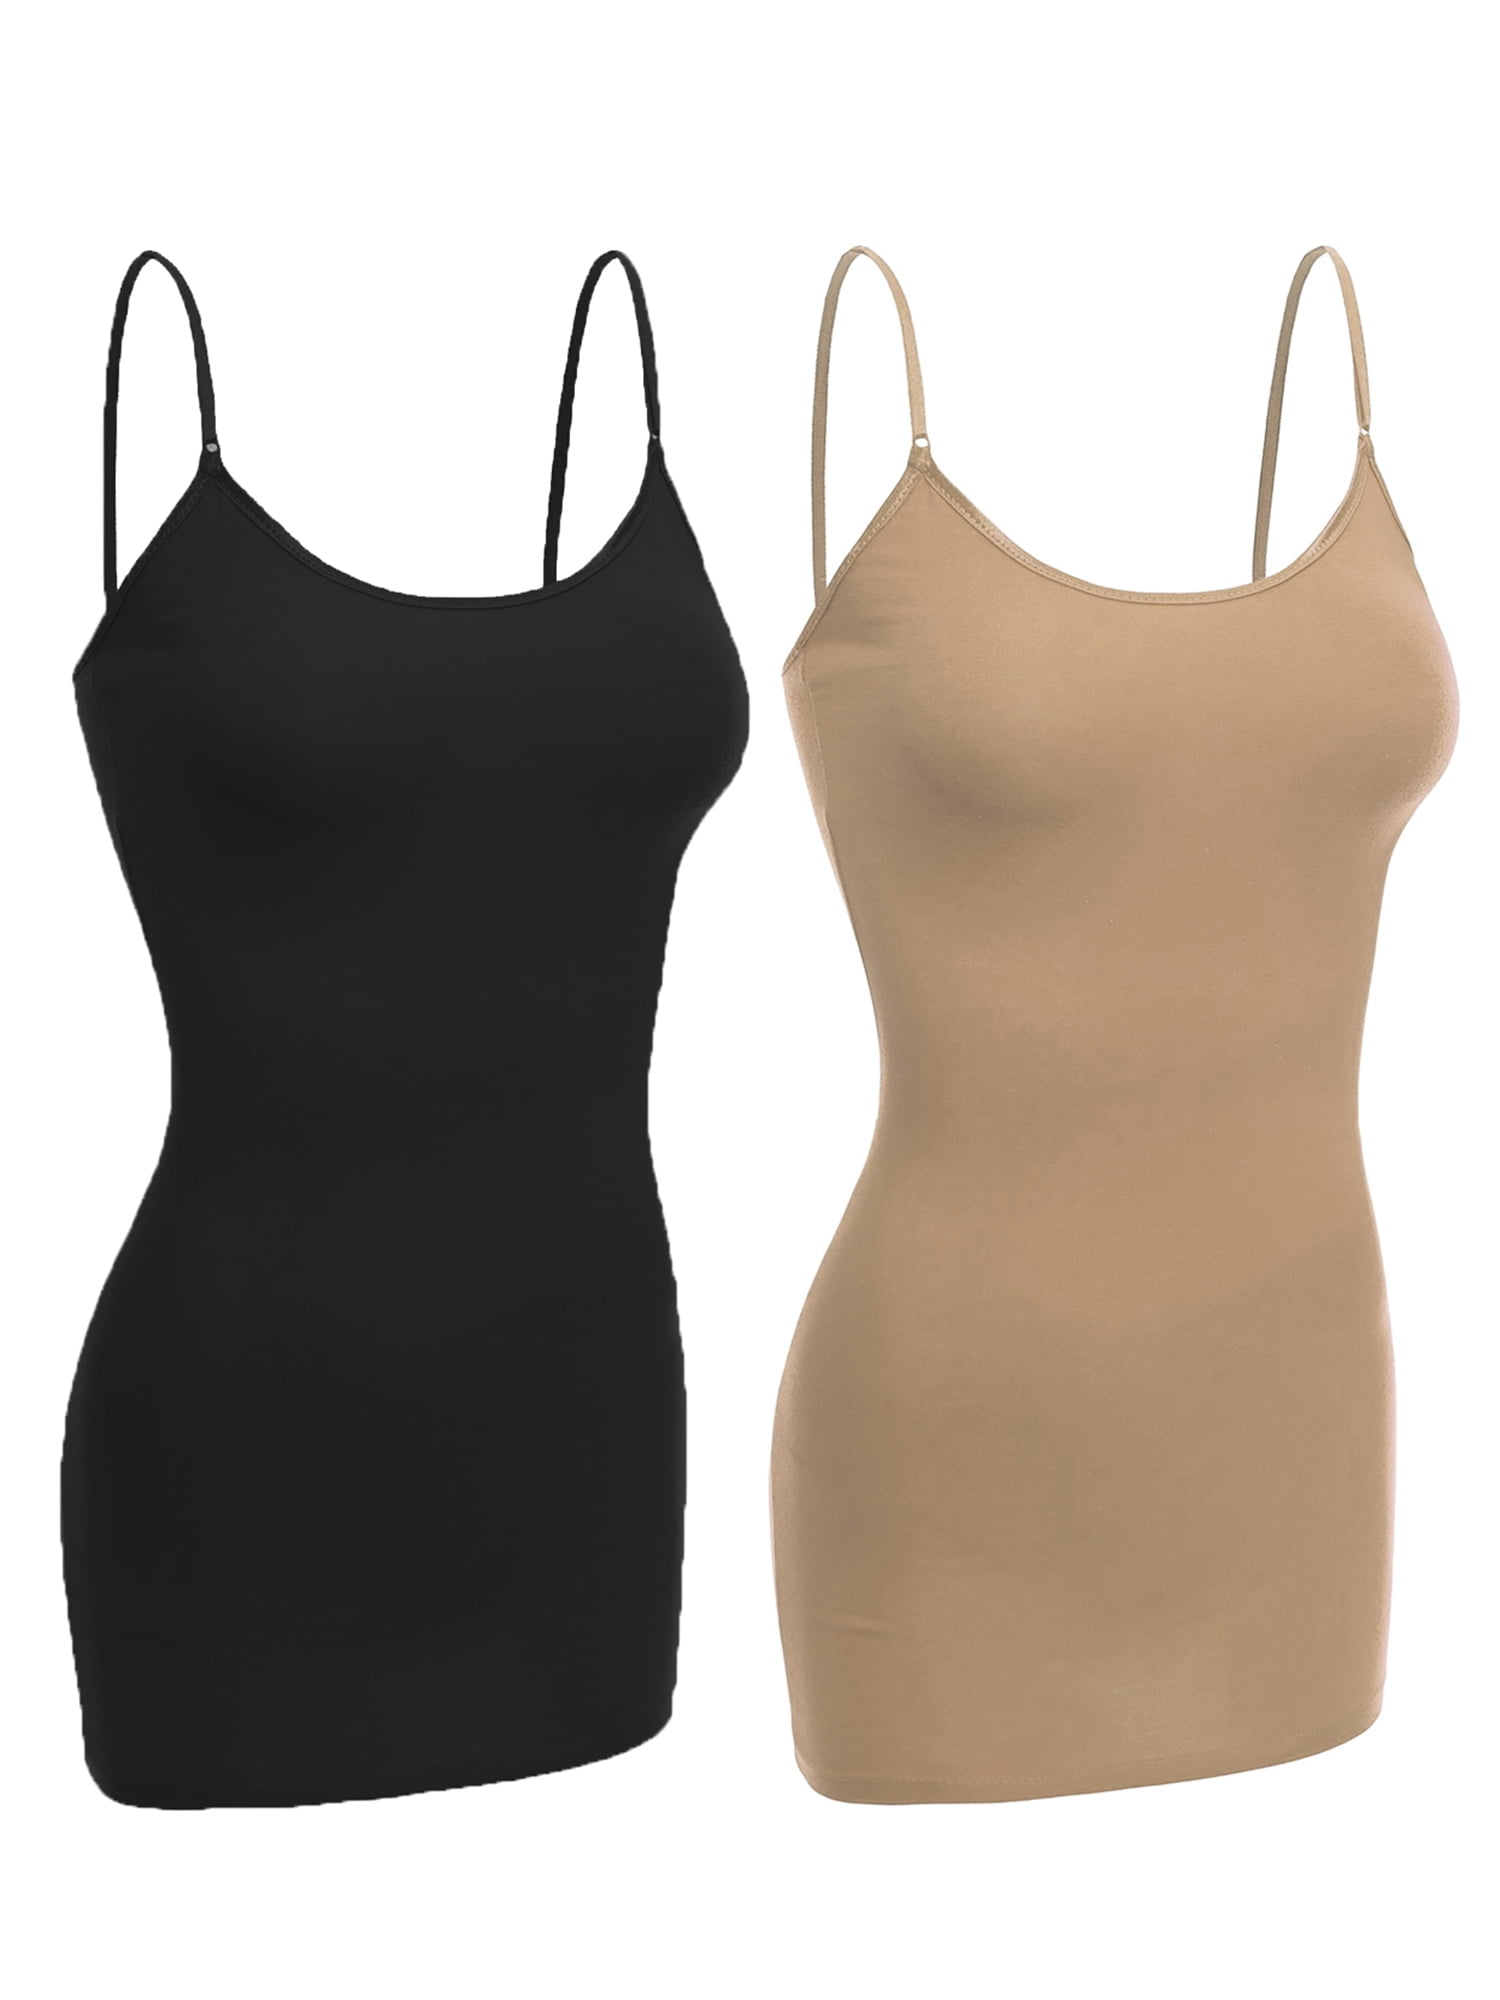 3 Color 3 Pieces Women Camisole Basic Camis Tanks Stretch Cami with Adjustable Straps